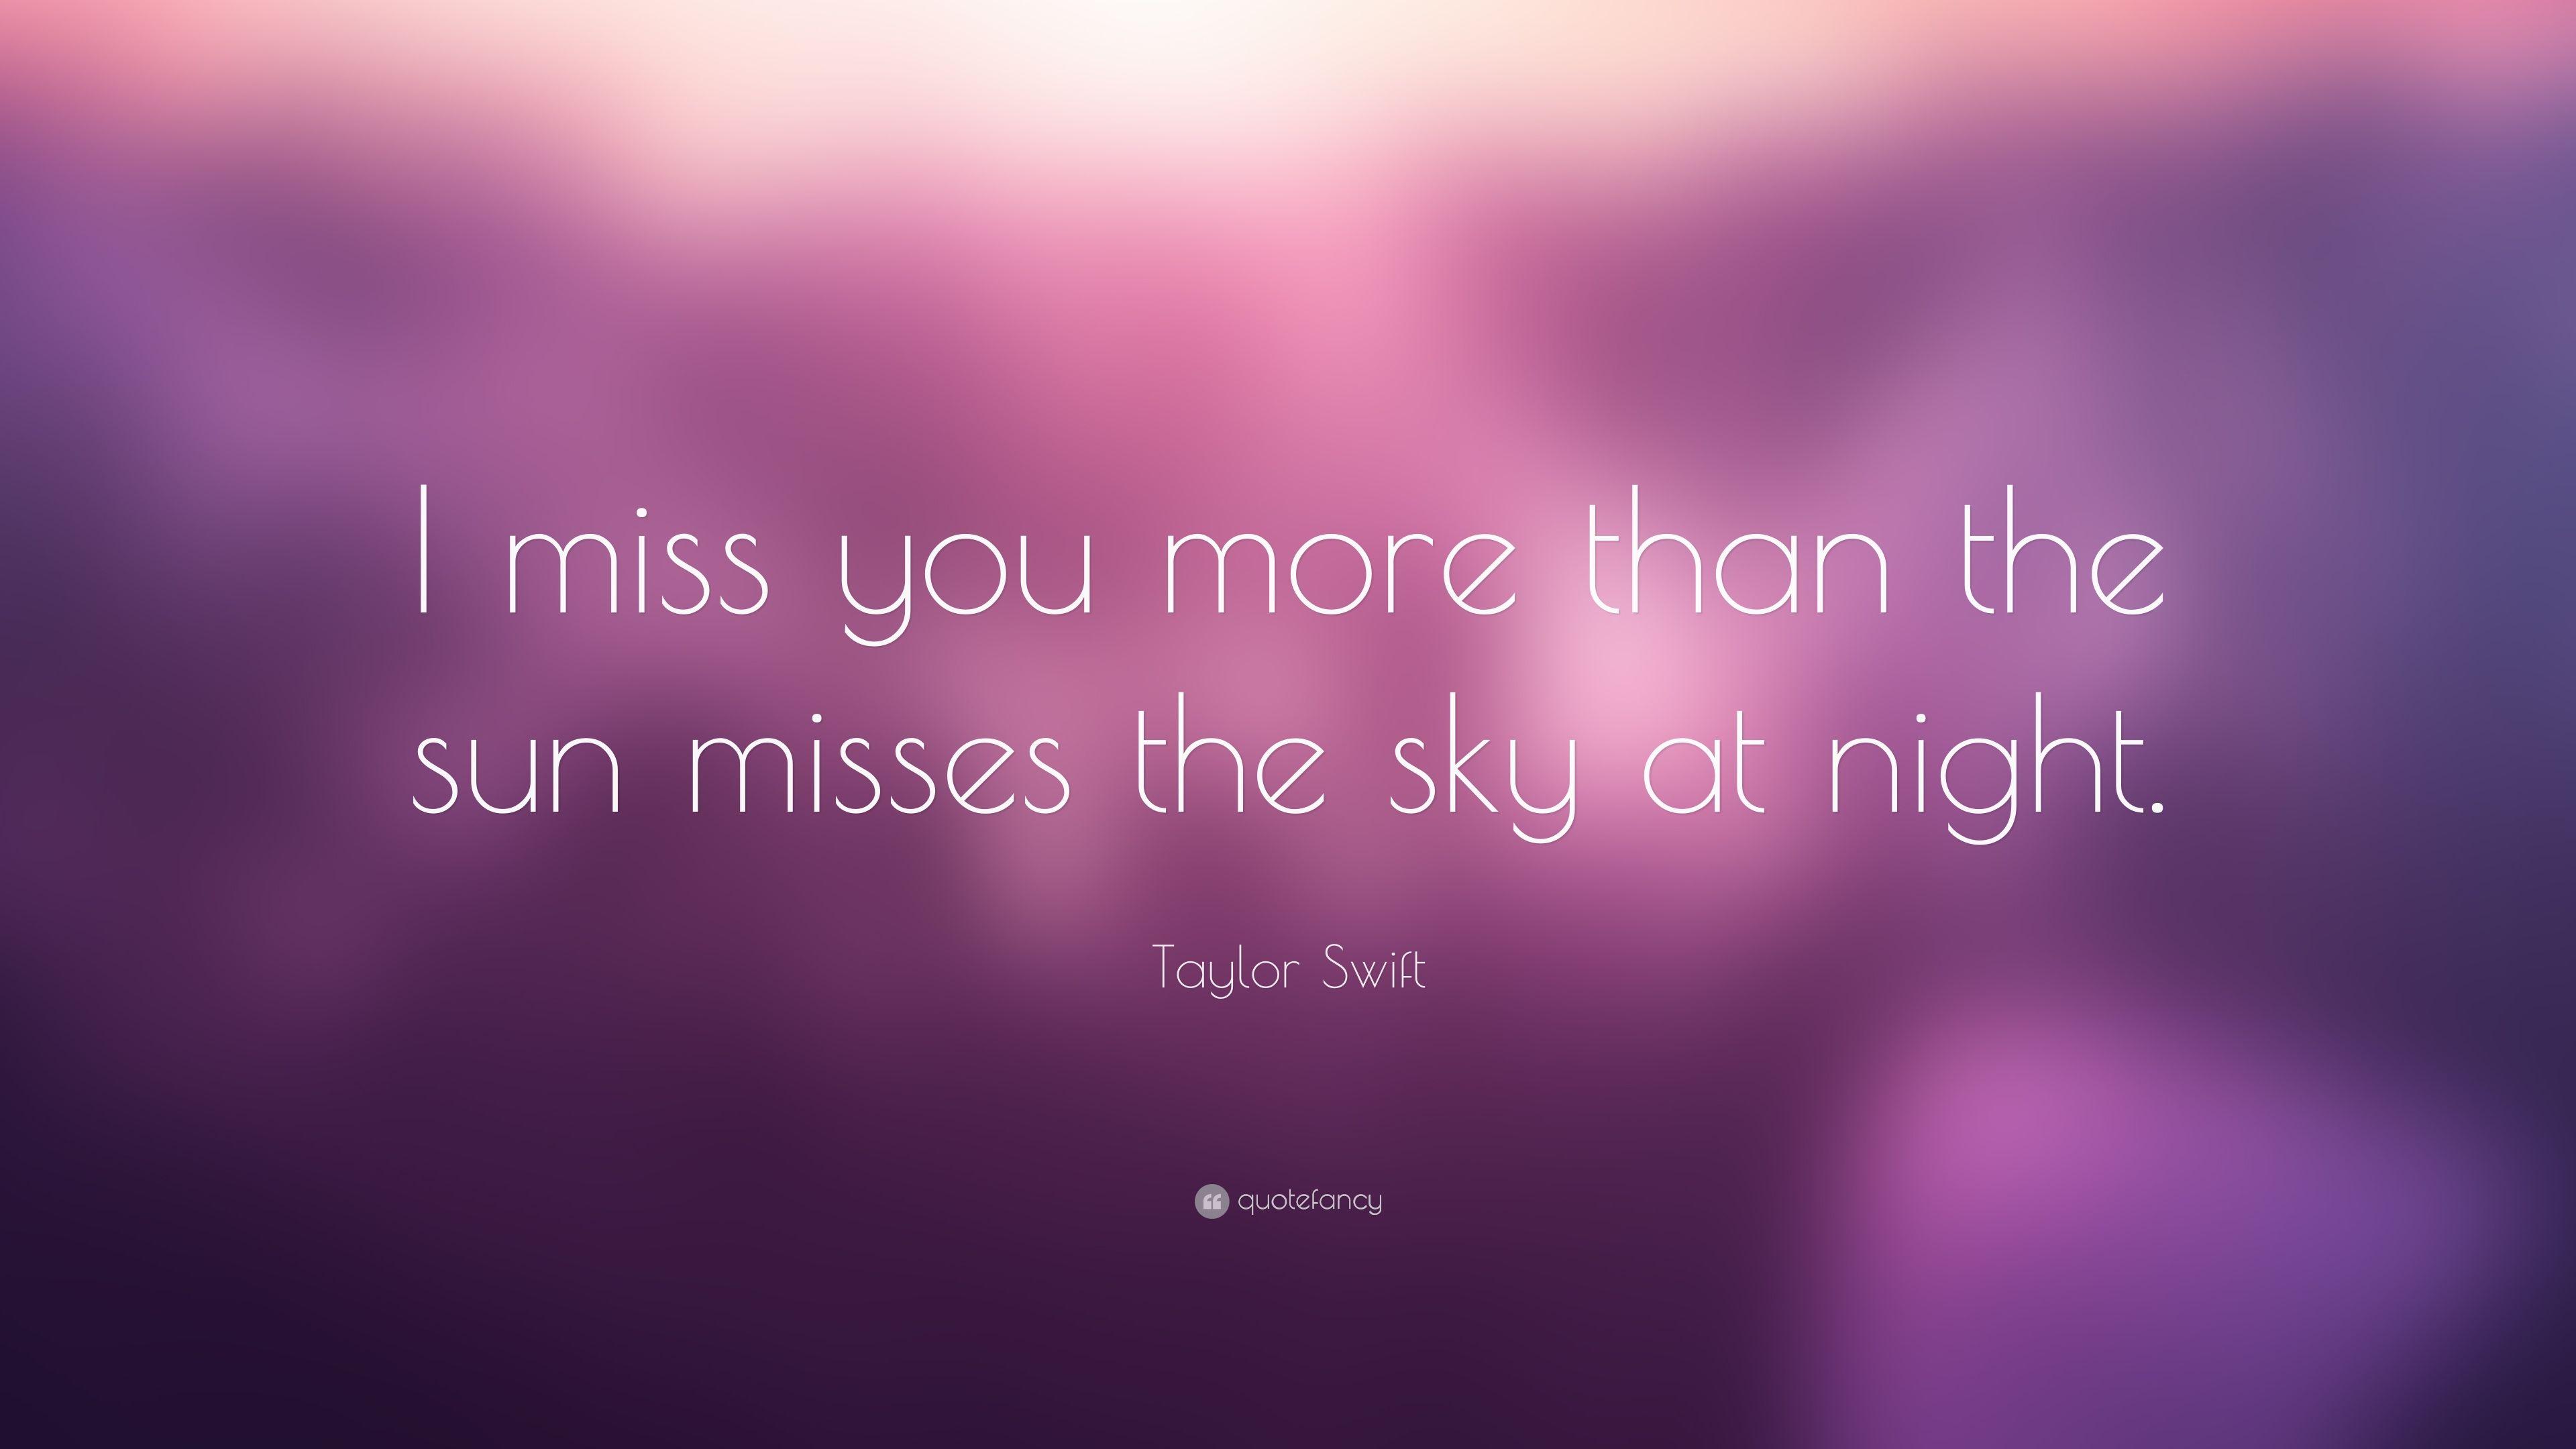 Taylor Swift Quote: “I miss you more than the sun misses the sky at